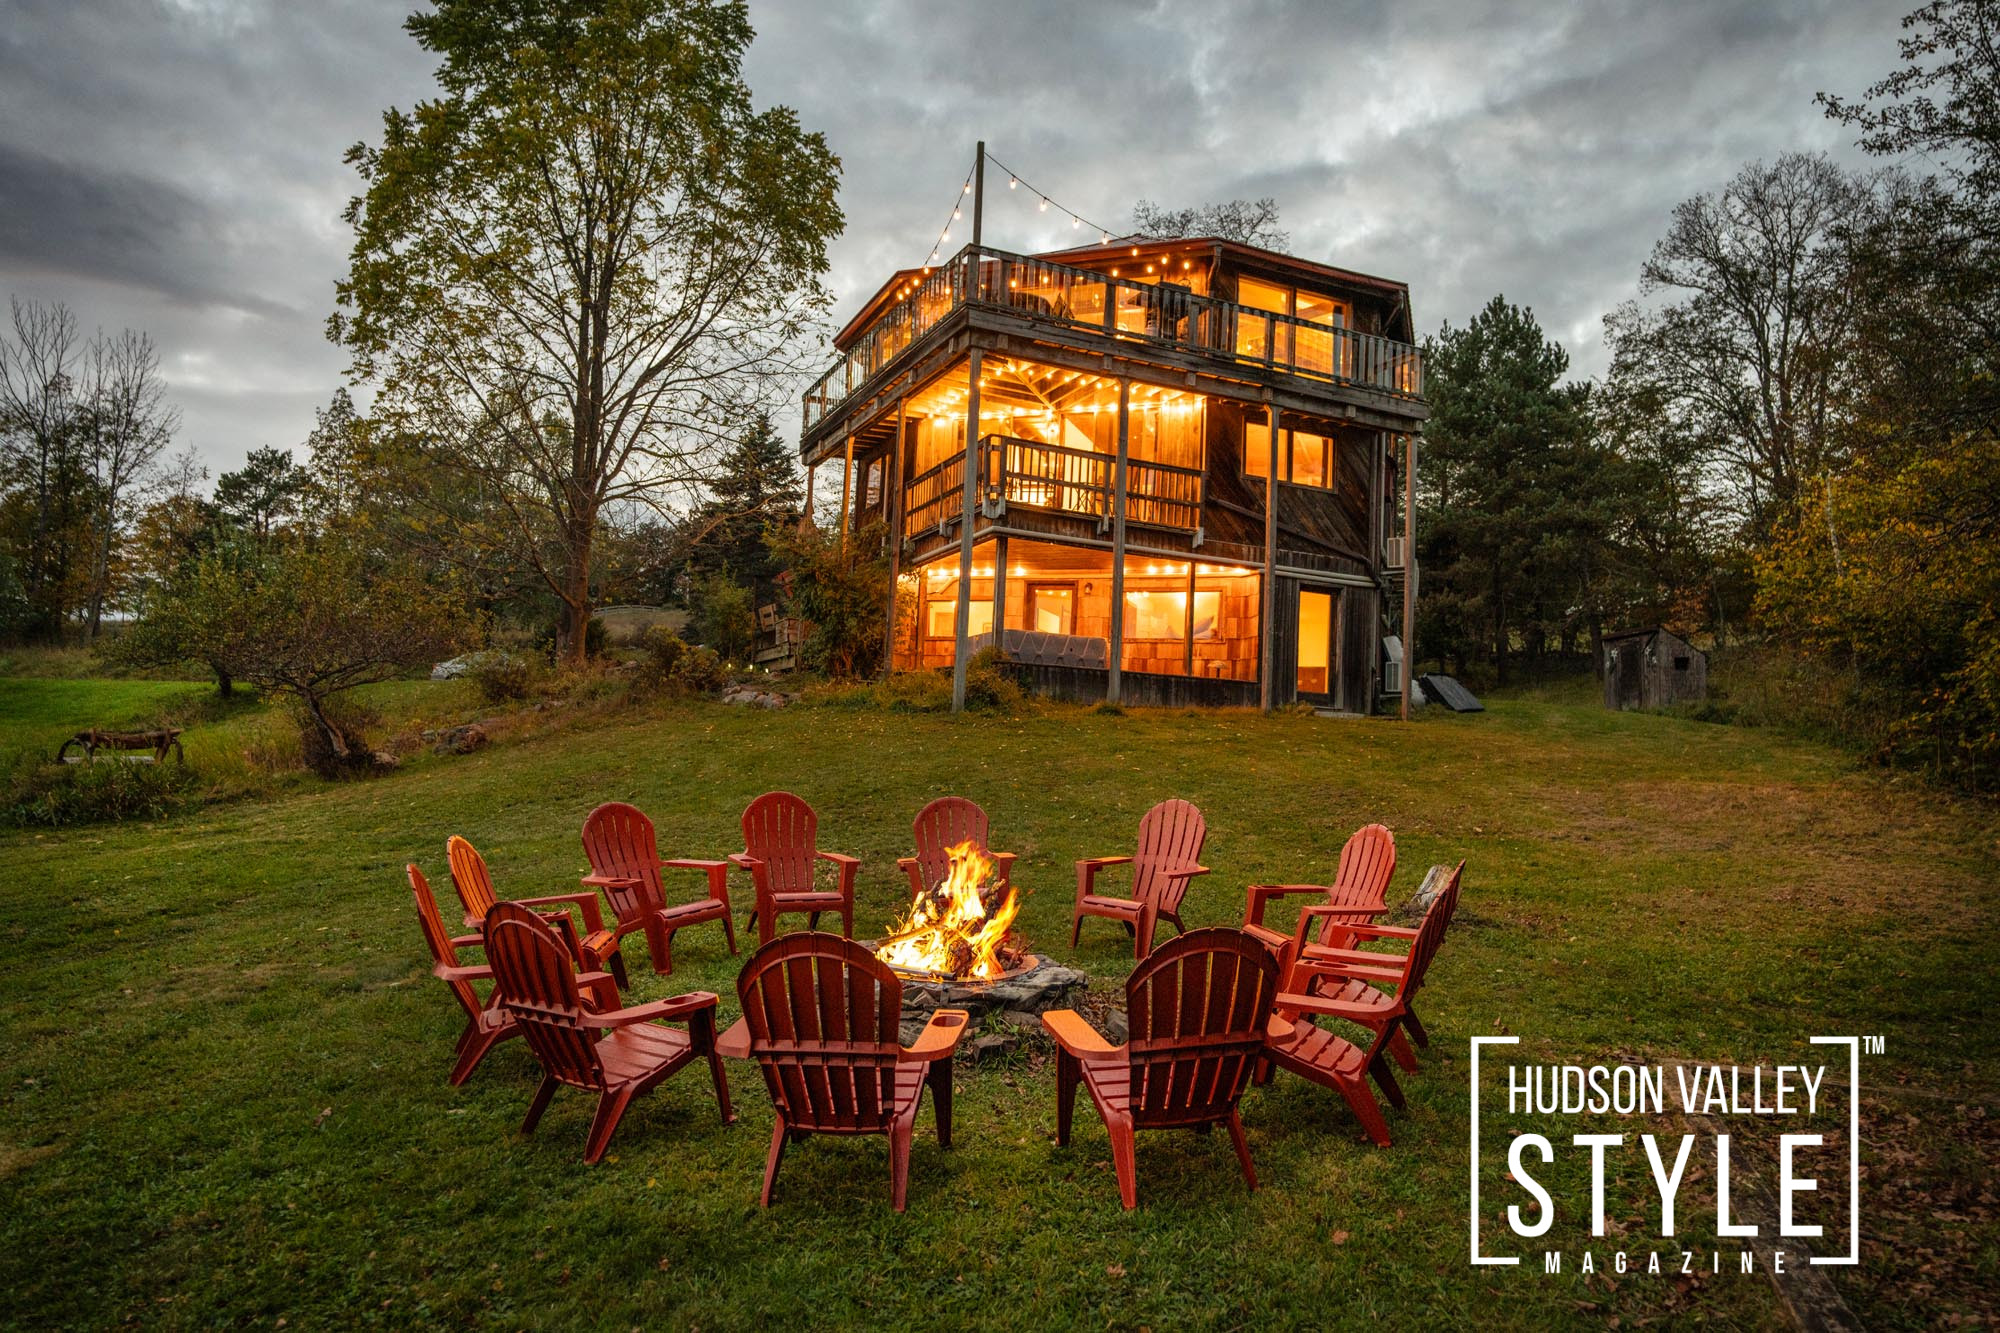 Escape to the Idyllic Rustic Cabin with a Hot Tub in the Catskill Mountains this Fall – Photography by Maxwell Alexander for Alluvion Media – Presented by Alluvion Vacations